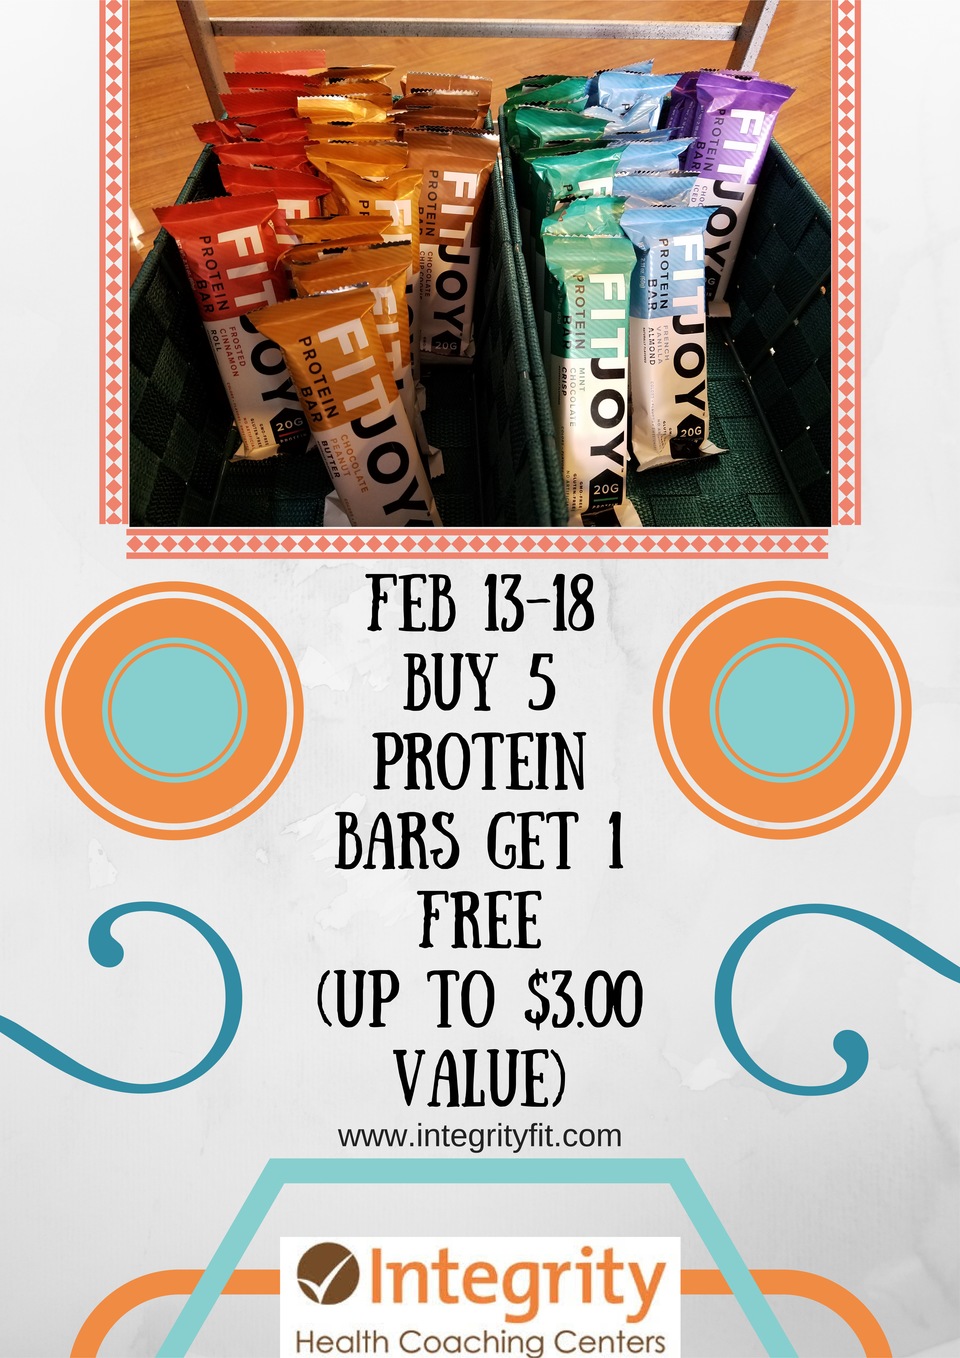 Store Special Feb 13-18